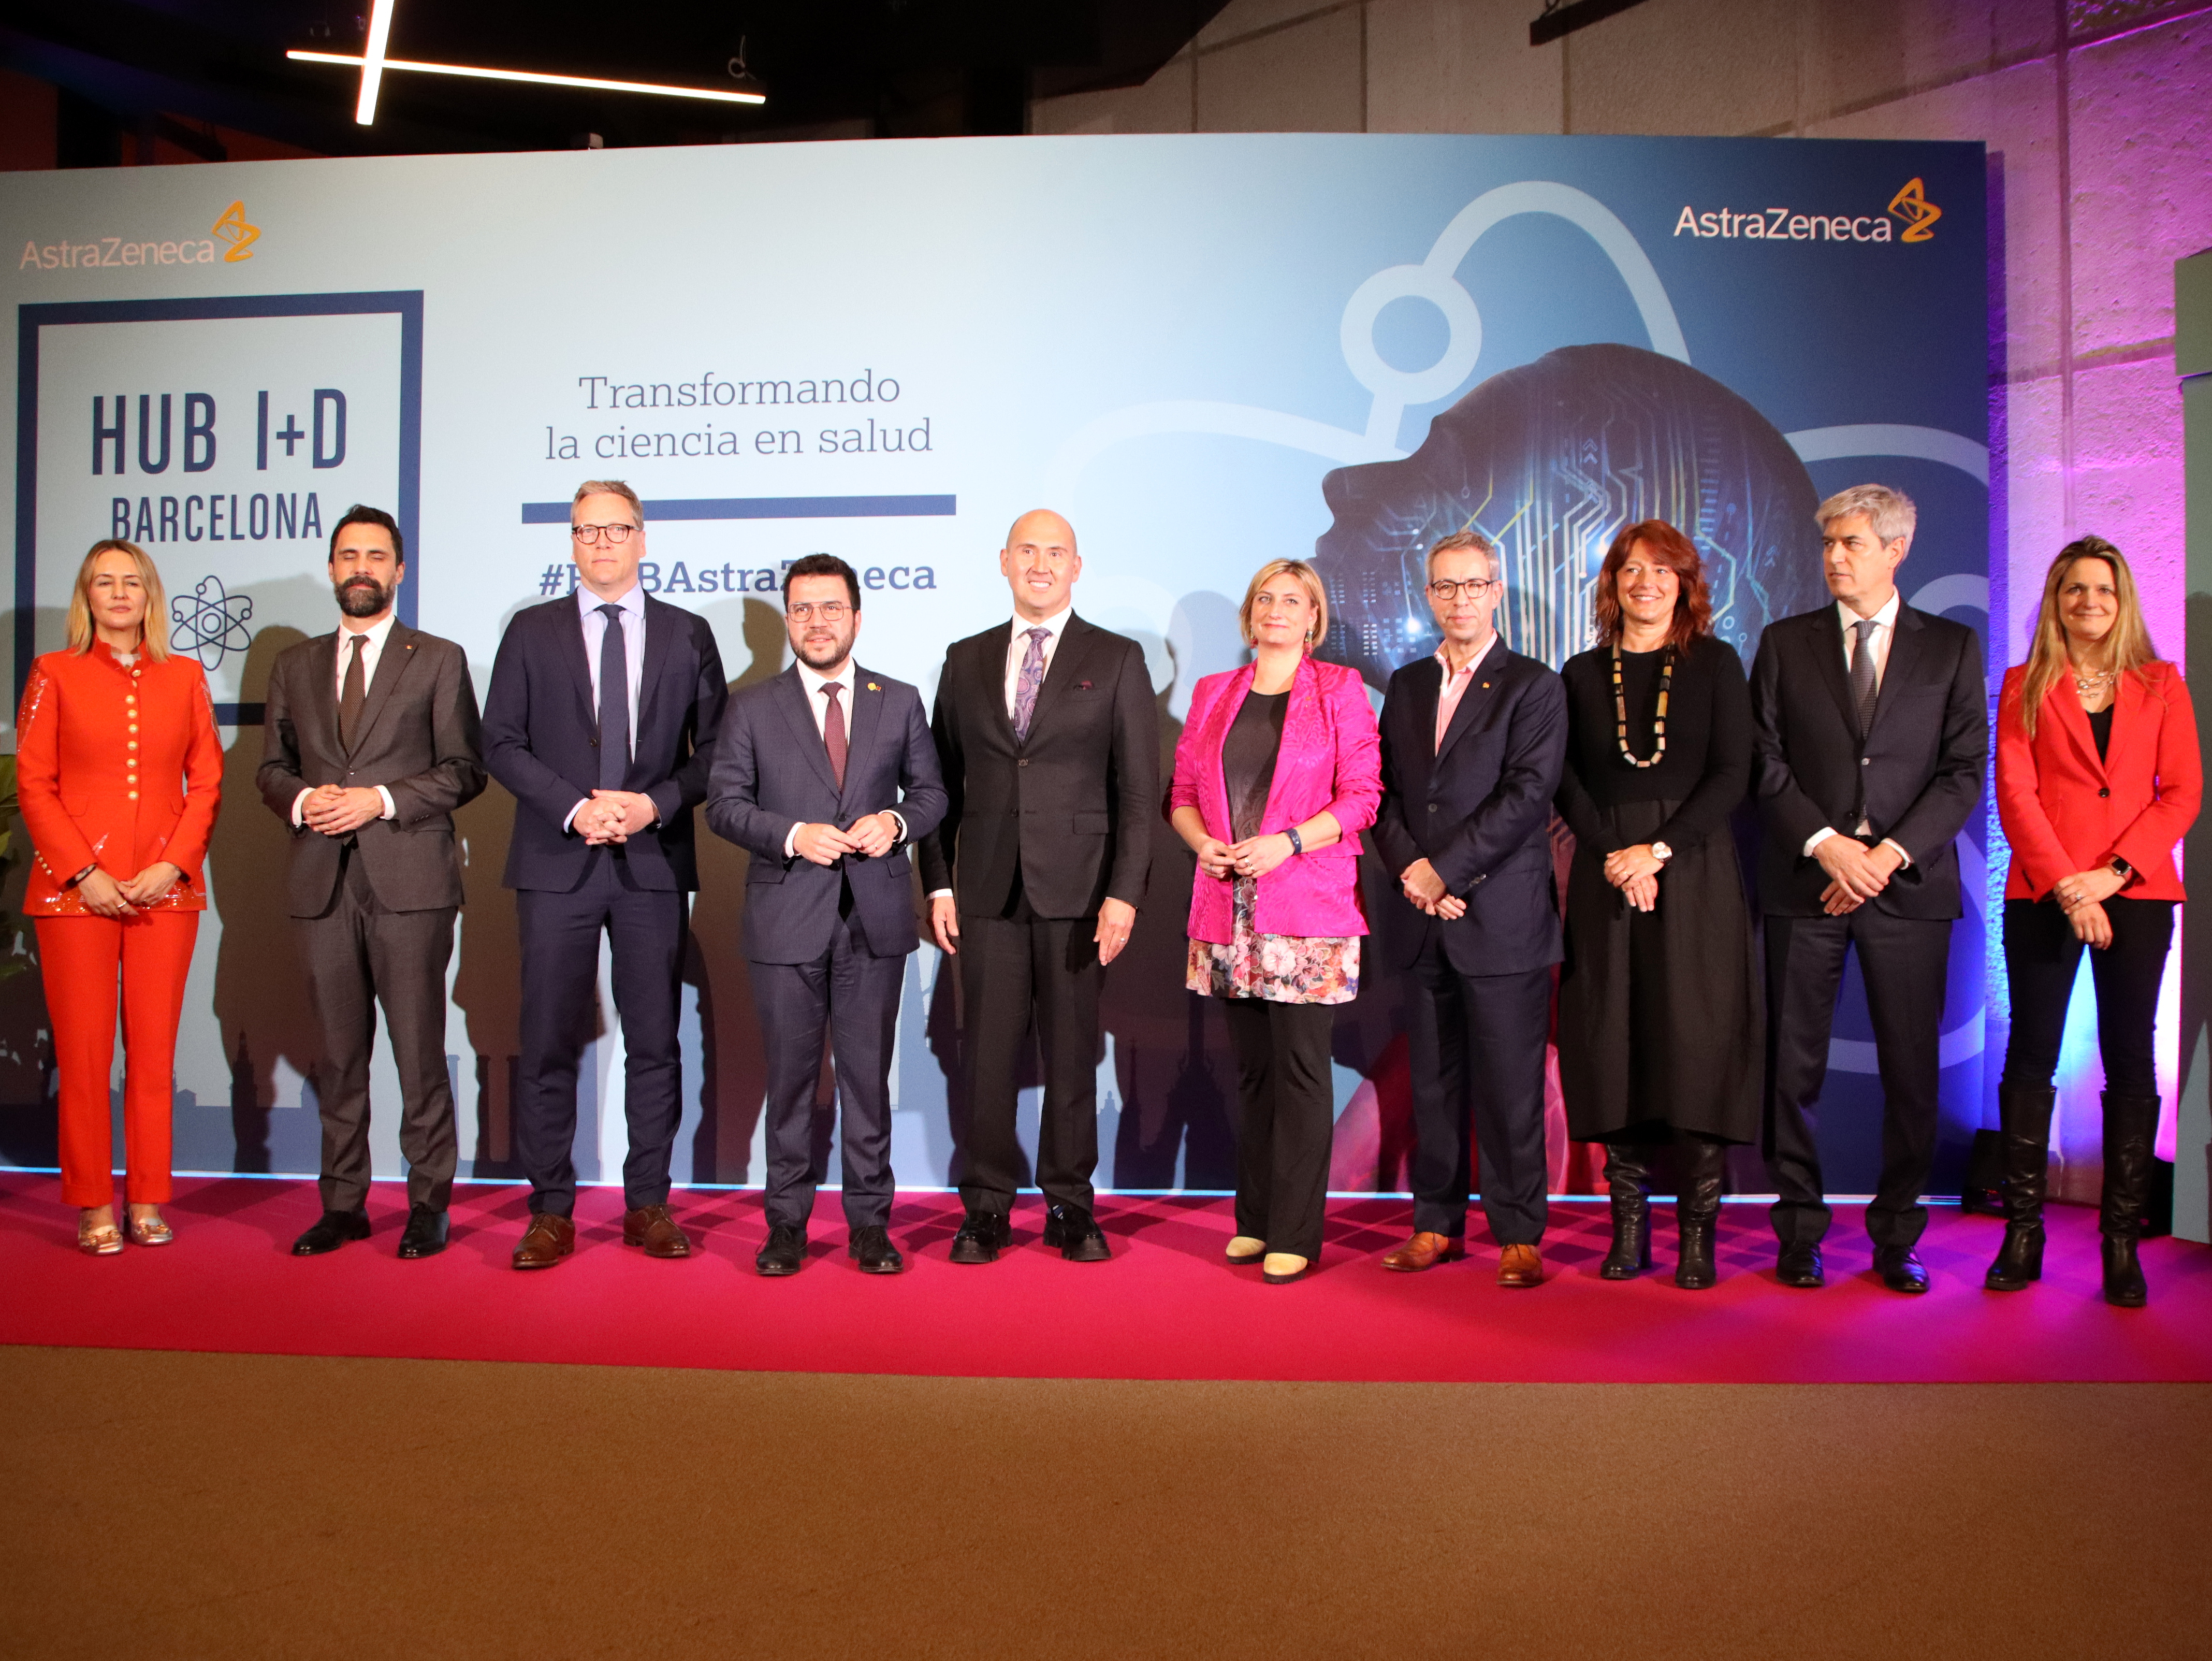 Representatives of pharmaceutical company AstraZeneca and Catalan authorities during a group photo in Barcelona on March 22, 2023